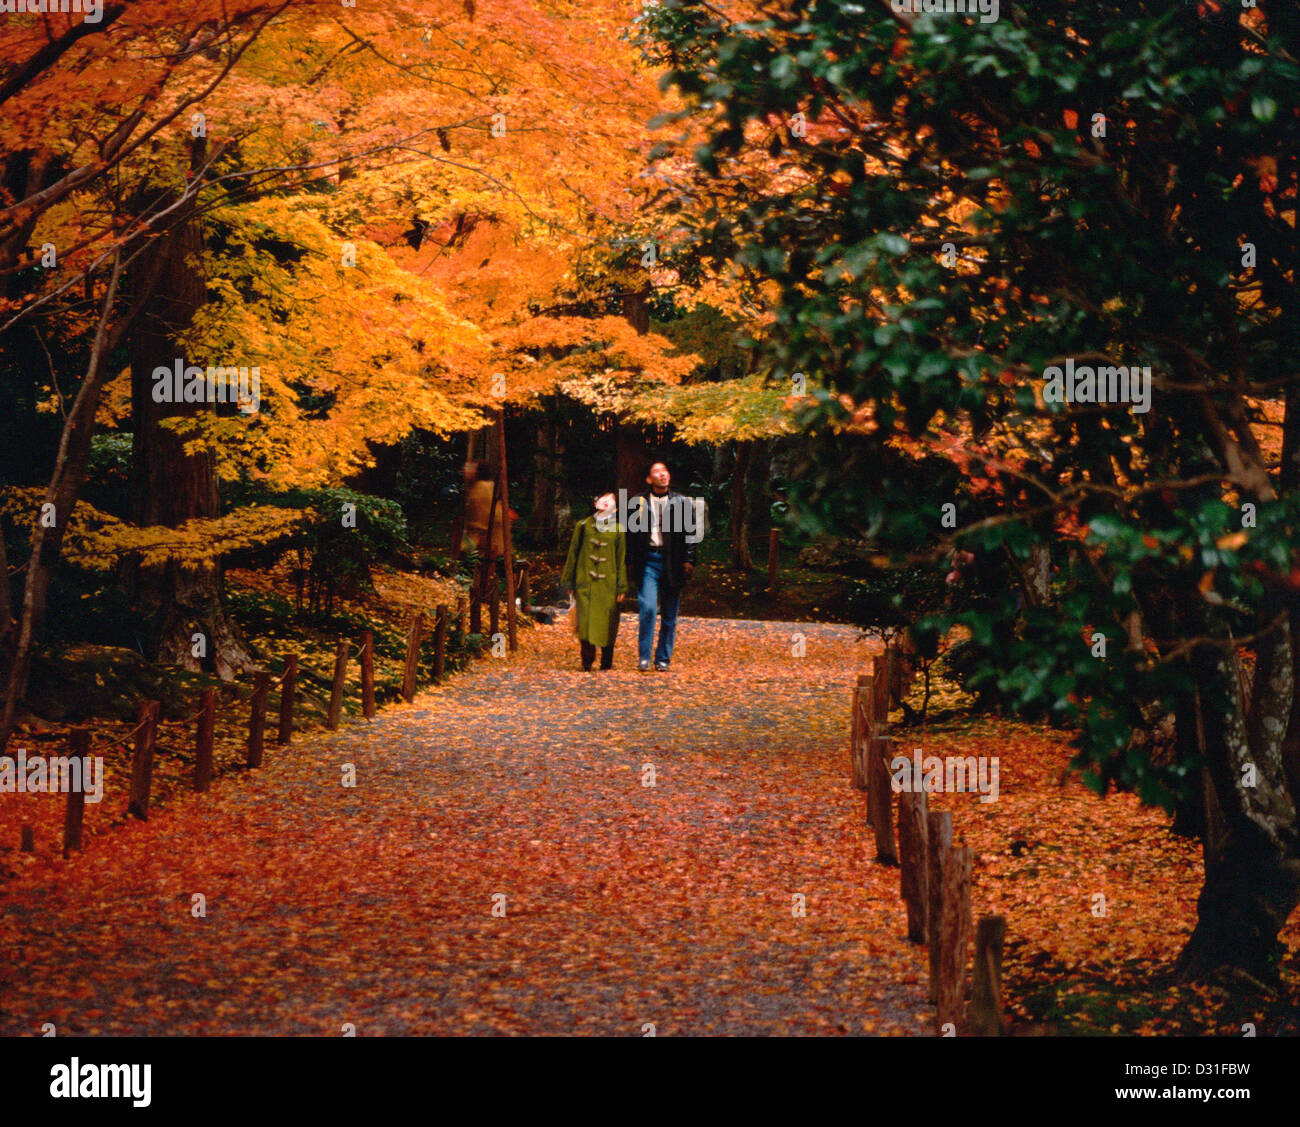 Walking among the autumn leaves at Ryoanji, a Buddhist temple in Kyoto, Japan Stock Photo